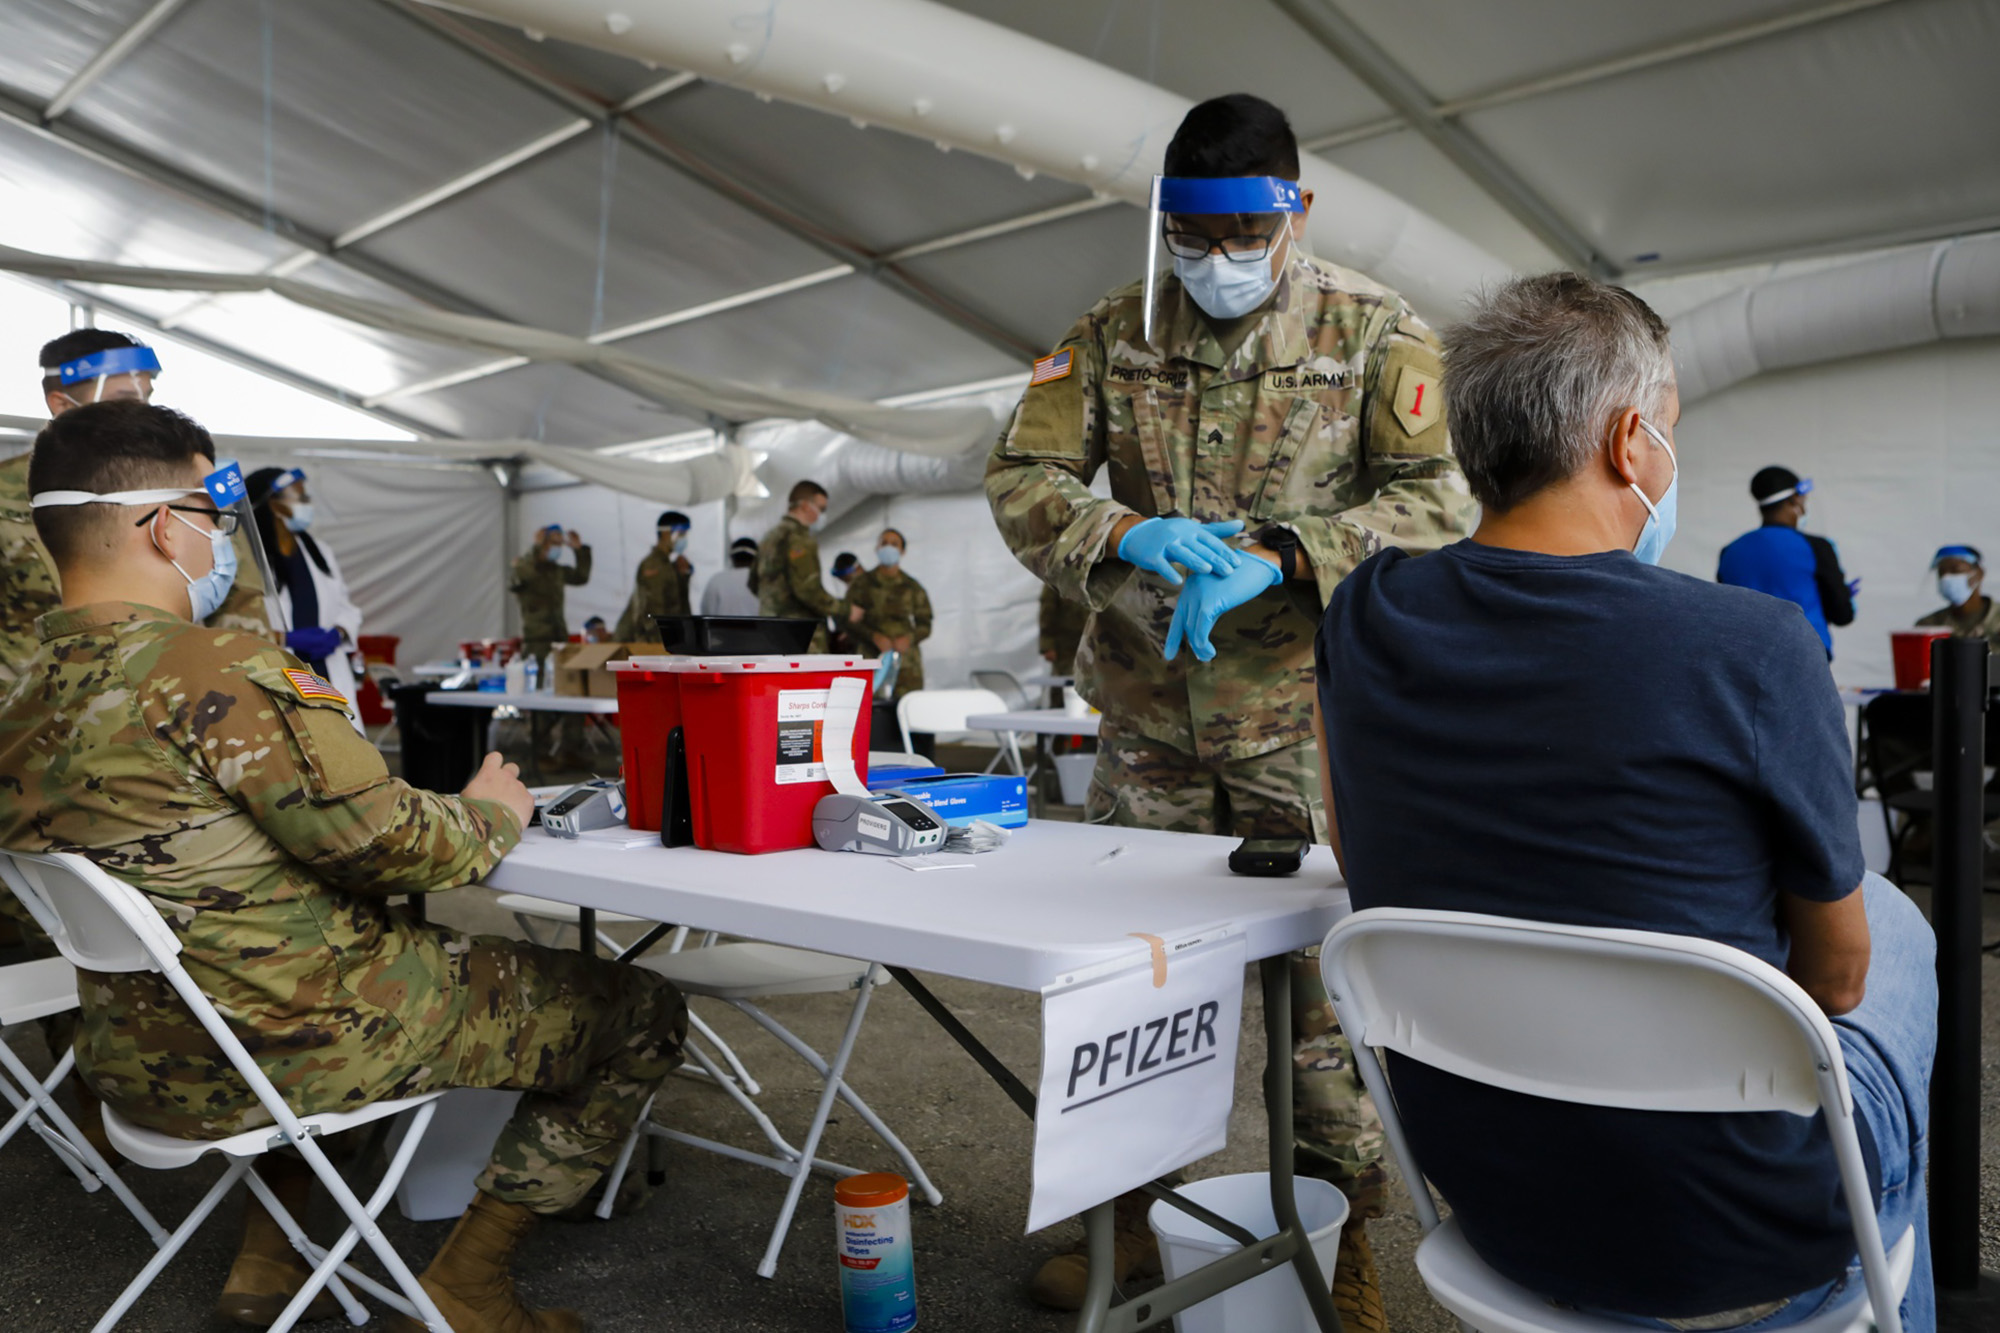 A U.S. Army soldier prepares to administer a dose of Covid-19 vaccine at a vaccination center in North Miami, Florida.